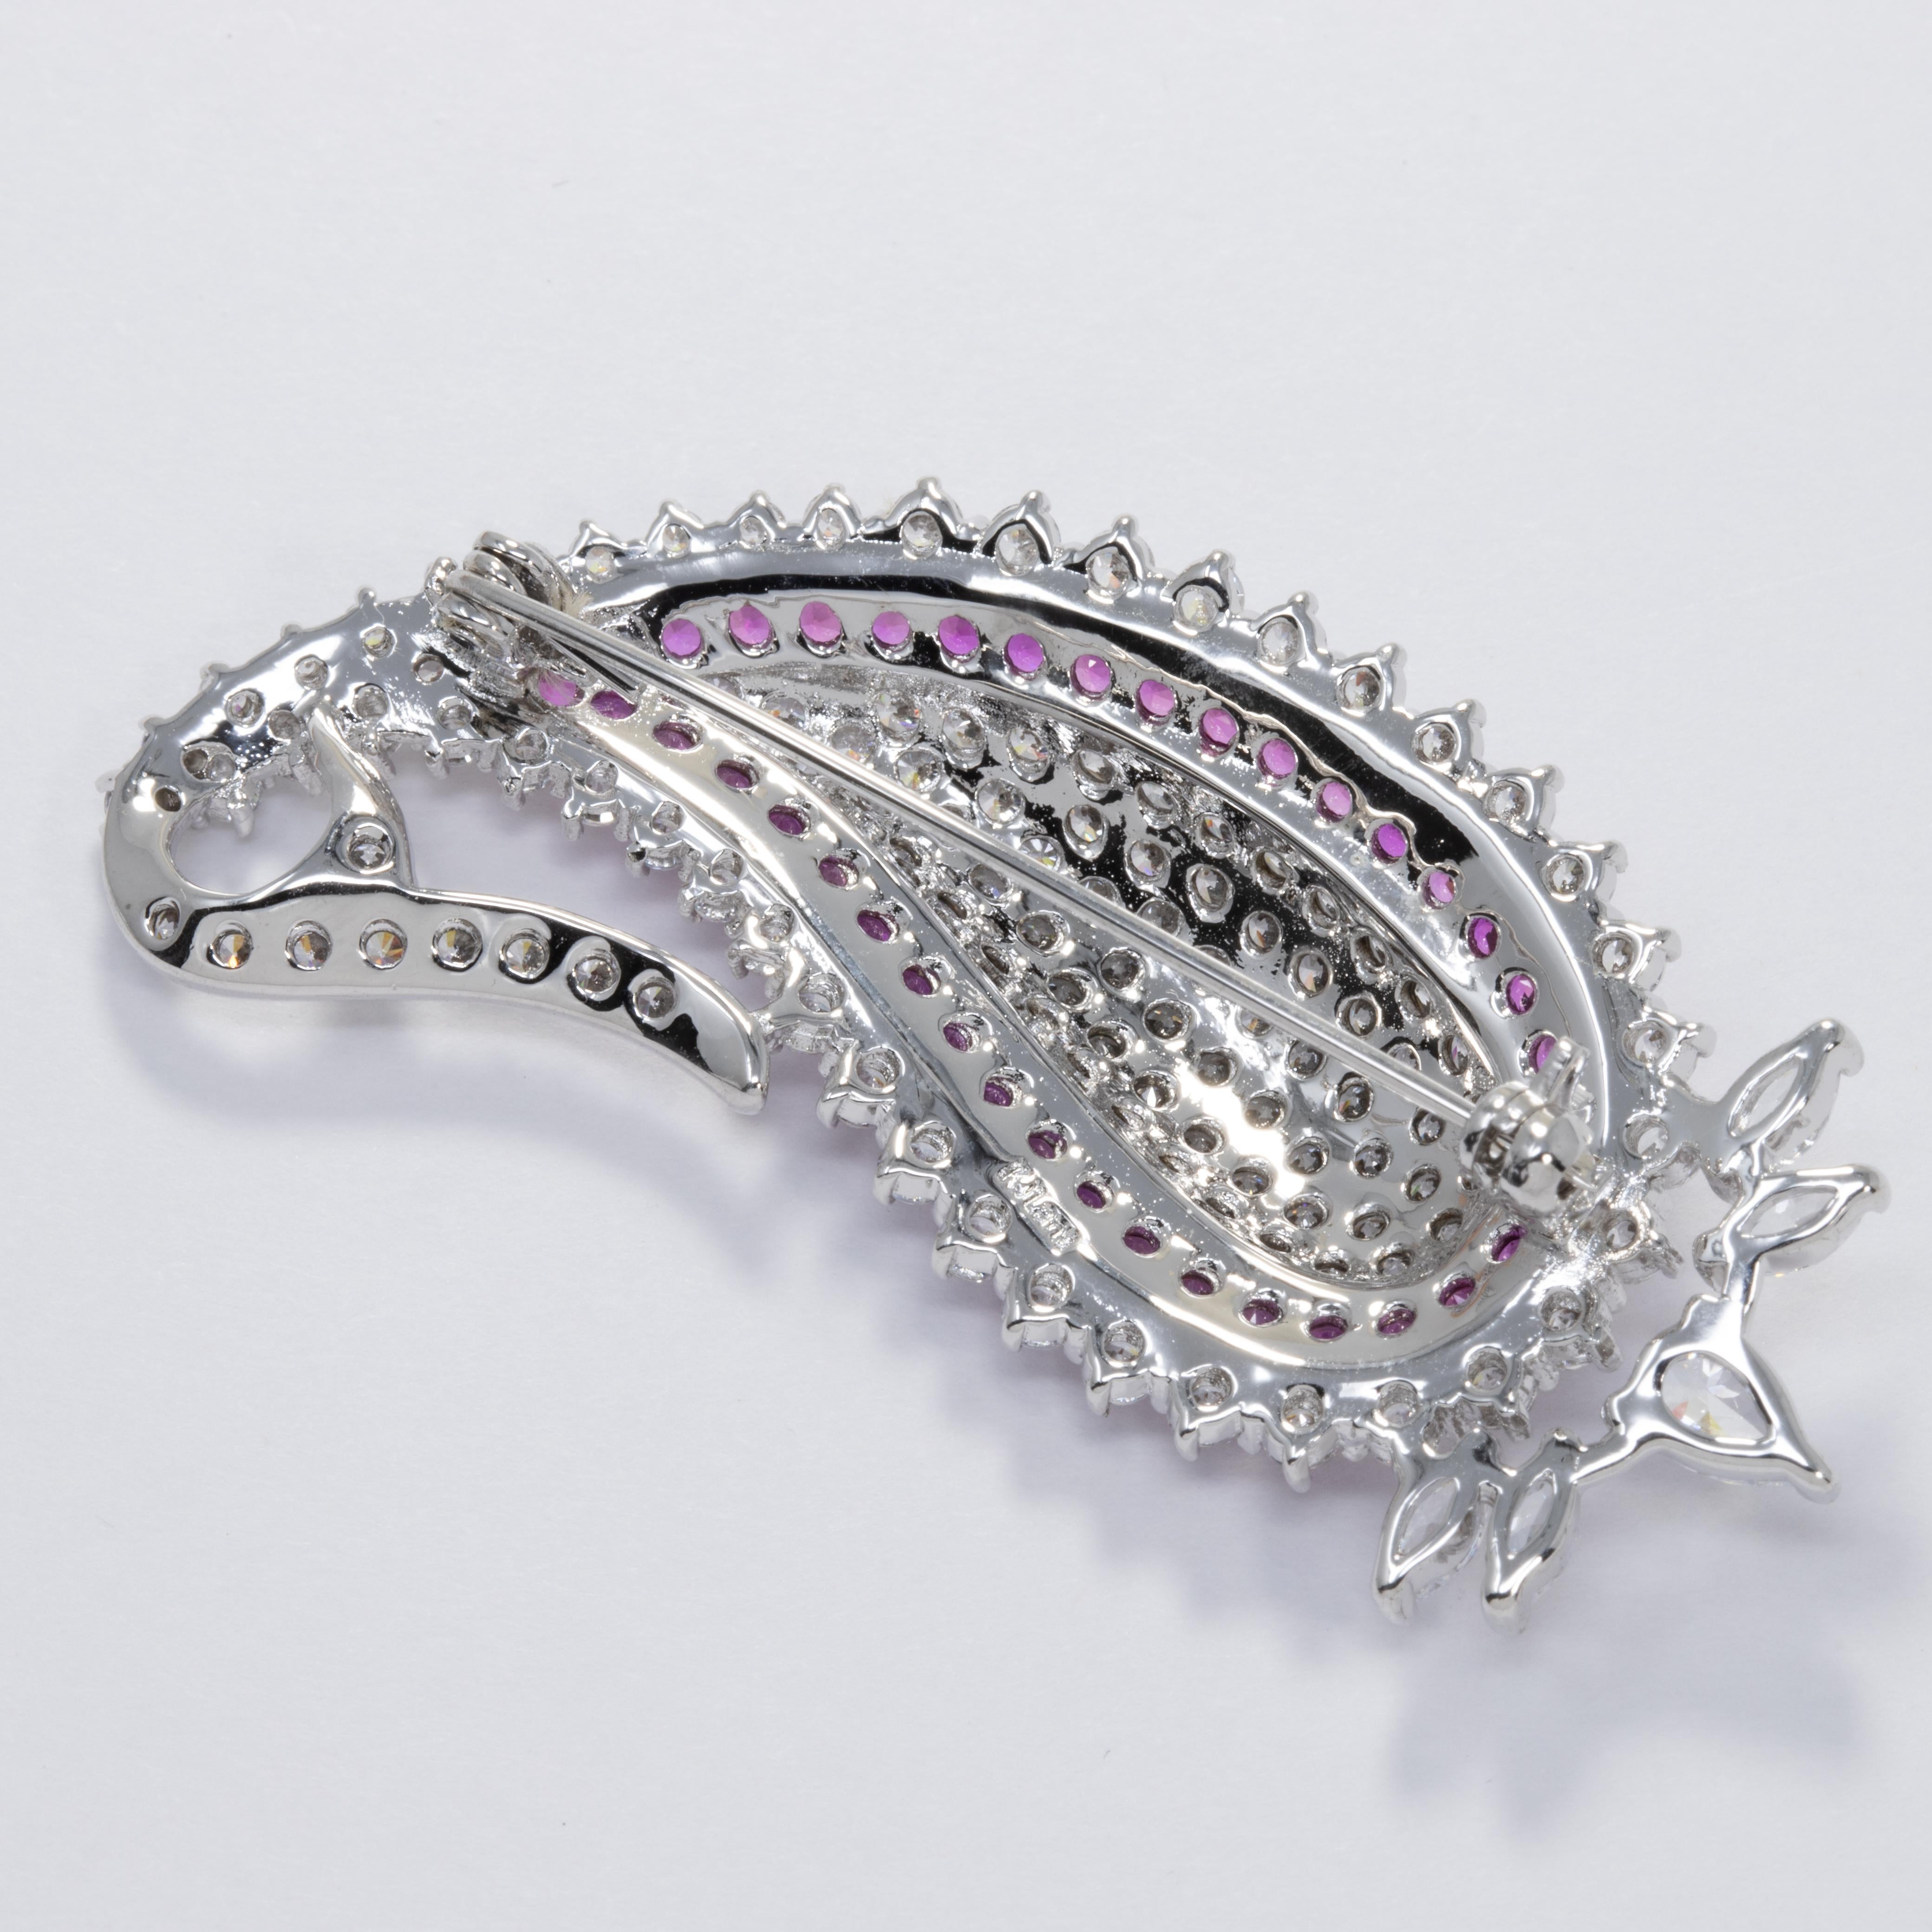 Kenneth Jay Lane KJL CZ Embellished Pave Crystal Paisley Motif Pin Brooch In New Condition For Sale In Milford, DE